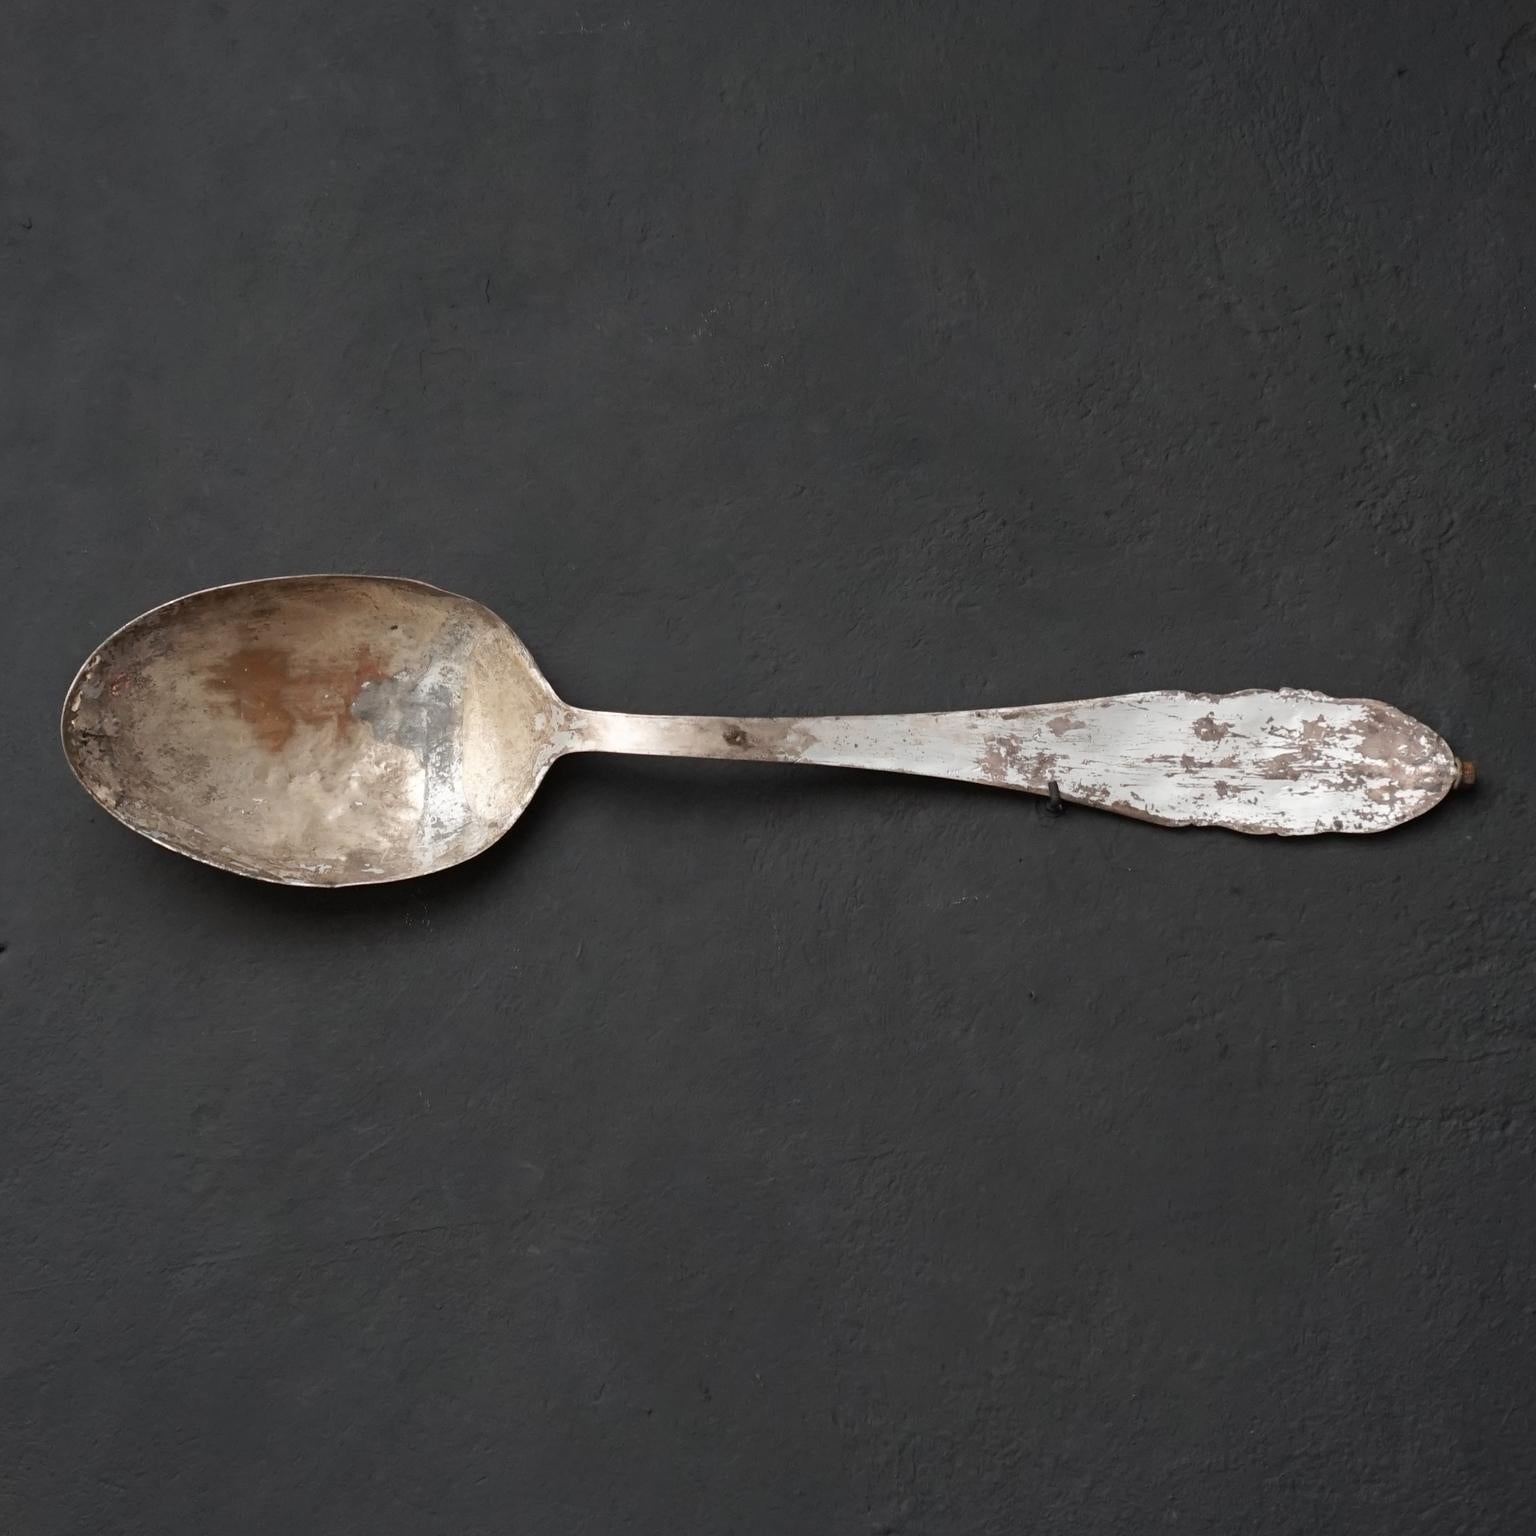 Very nice 1920s 1930s large metal industrial advertising sign in the form of a spoon in Rococo style.
The Spoon is heavy and partly silver plated.
I think the 'back' of the spoon was the visible part, maybe with text on the white painted parts.
Now